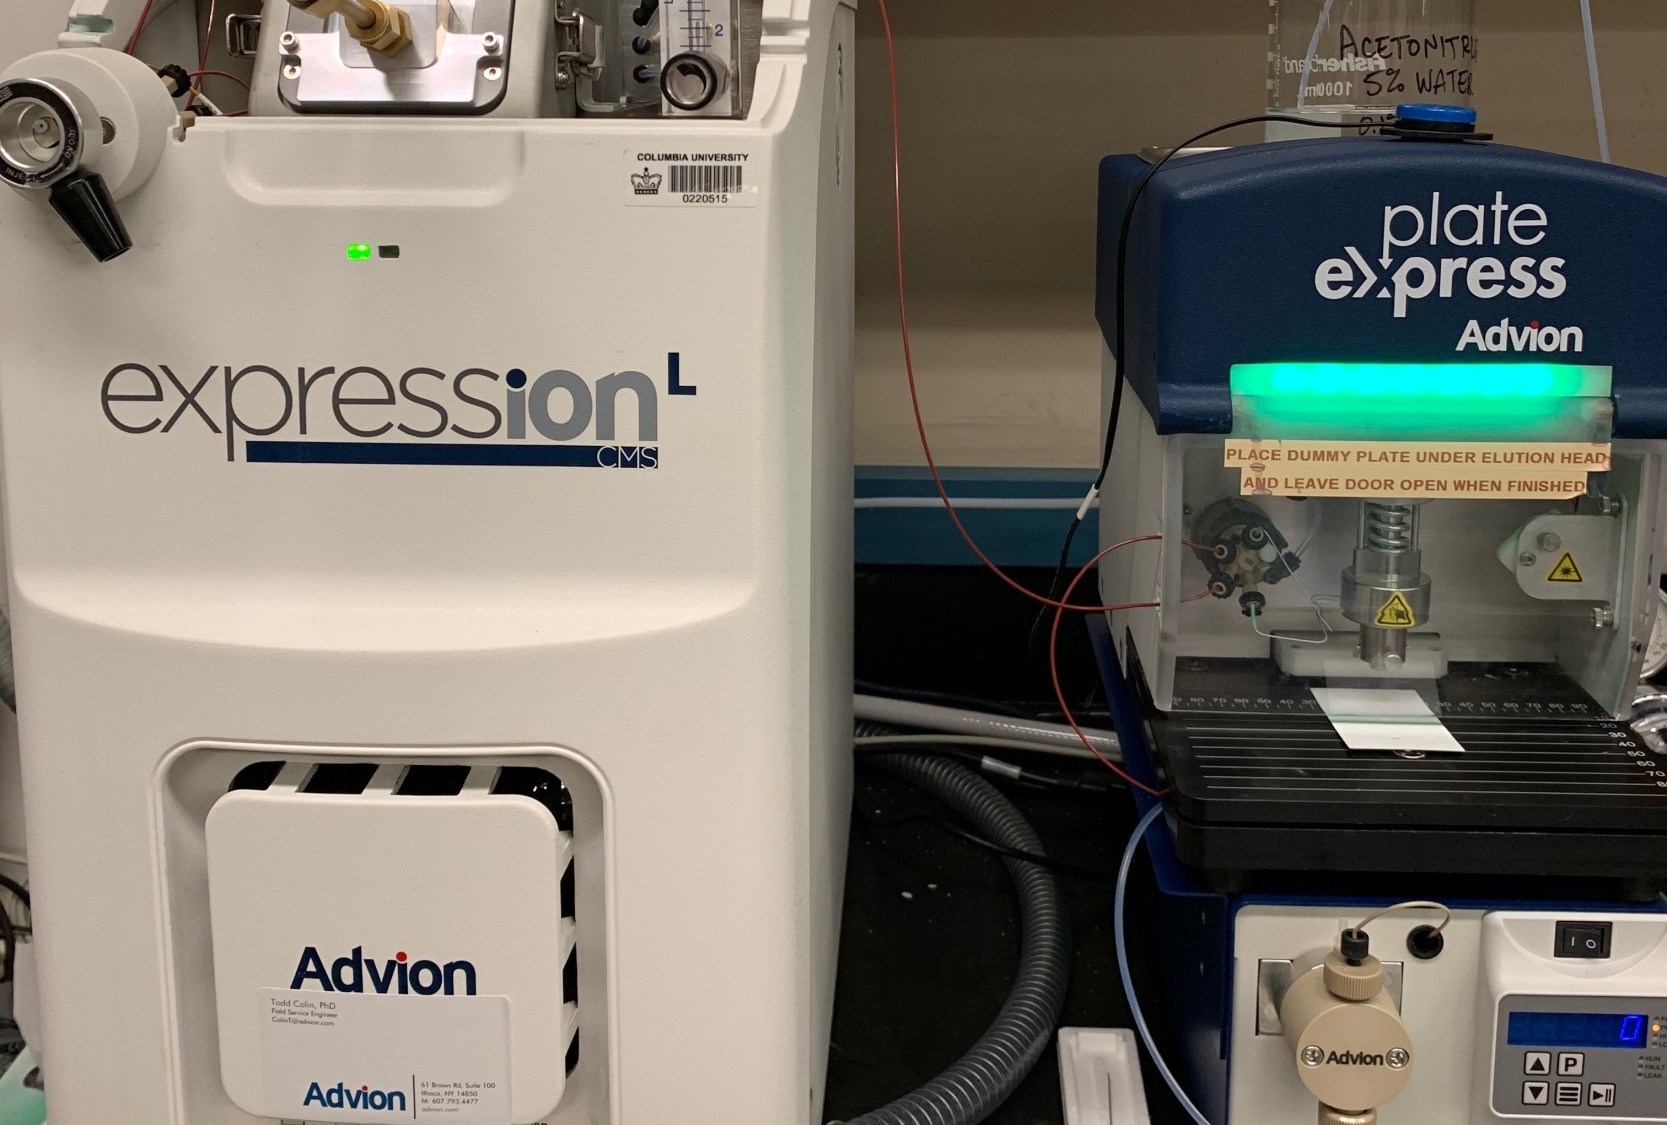 Advion ExpressIon CMS-L with Plate Express